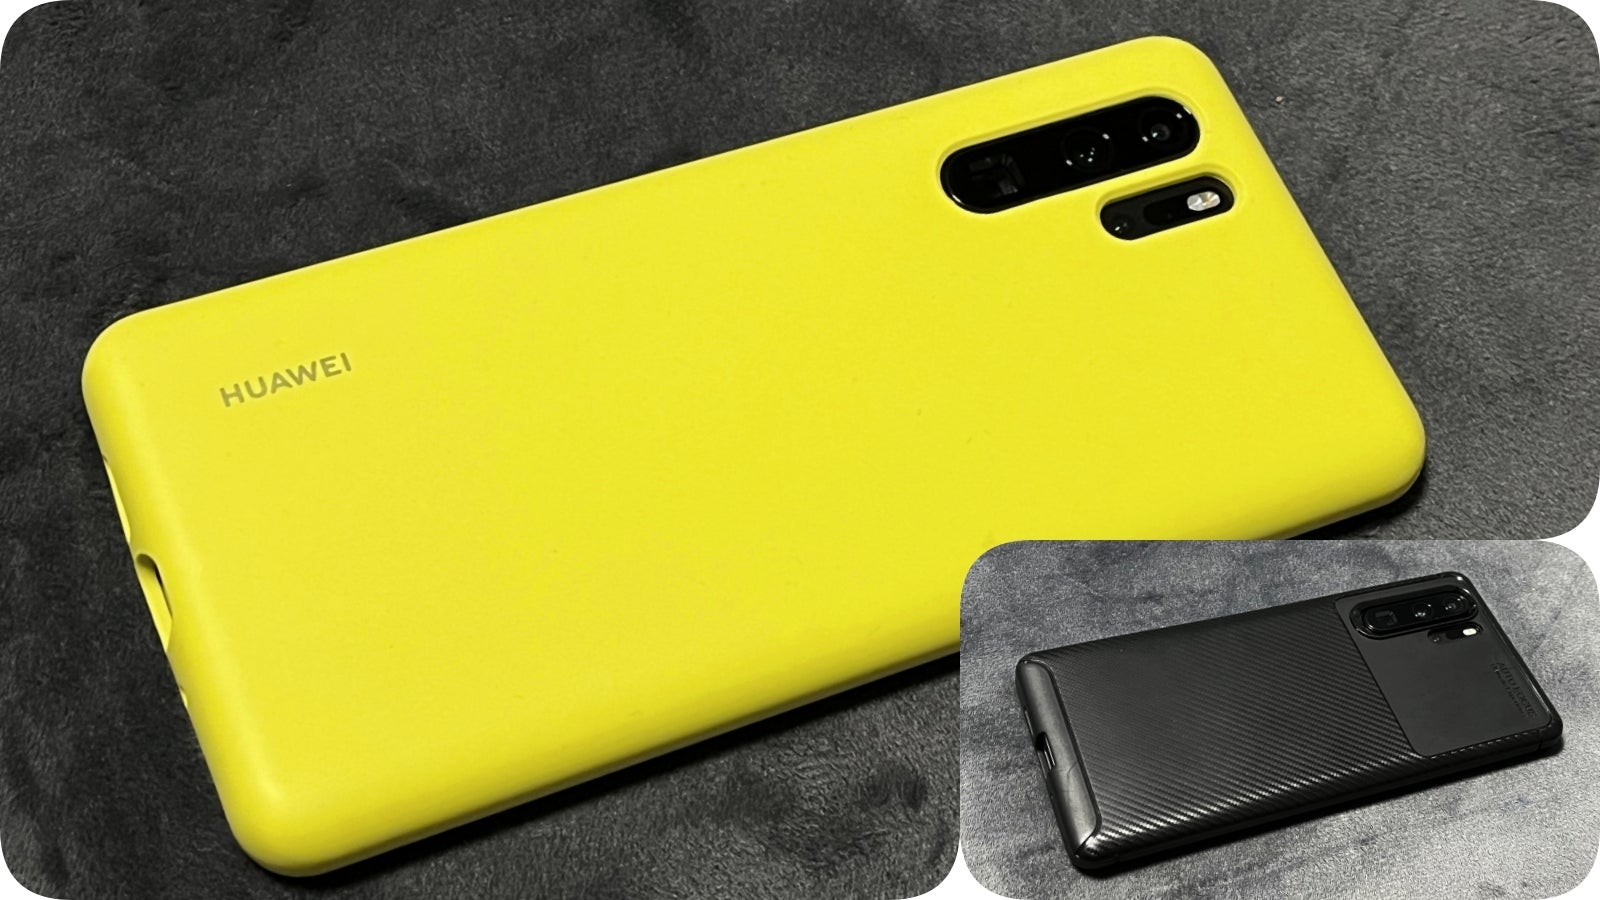 I guess my Huaweu P30 Pro from 2019 looks cool again. This case didn't cost $800. - New yellow iPhone 14 is a mind game: Millions to fall for hottest but worst Apple deal in history?